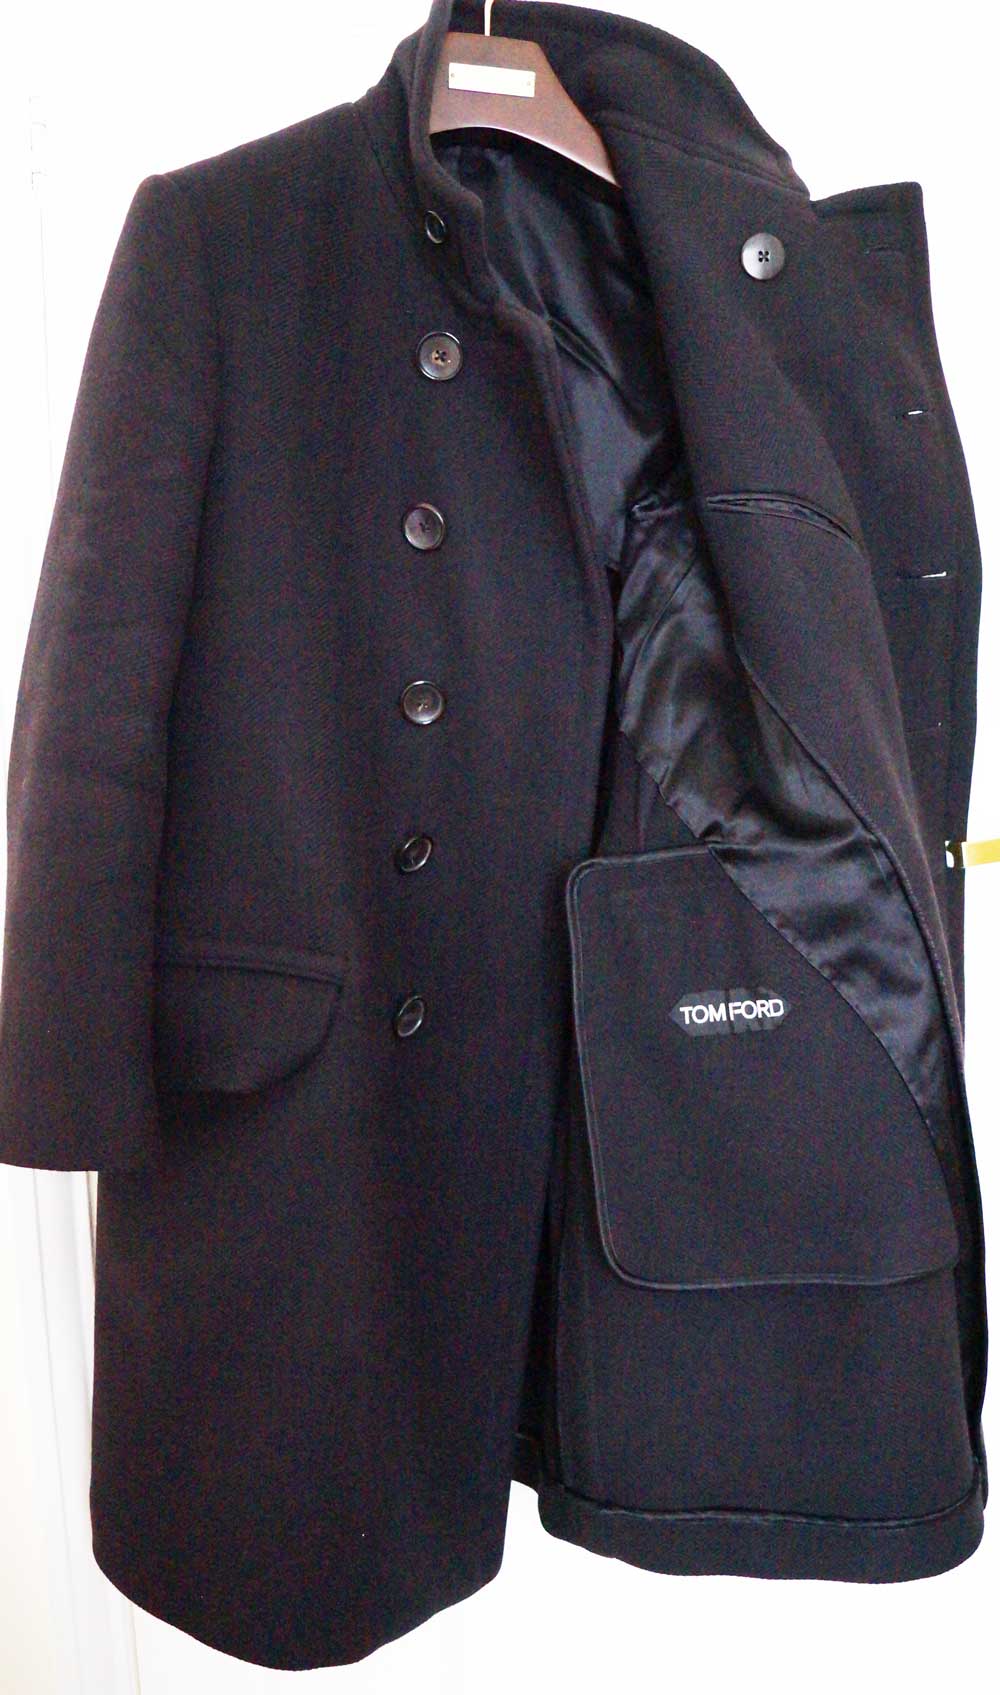 Quantum of Solace - The Tom Ford Kazan Coat | Review